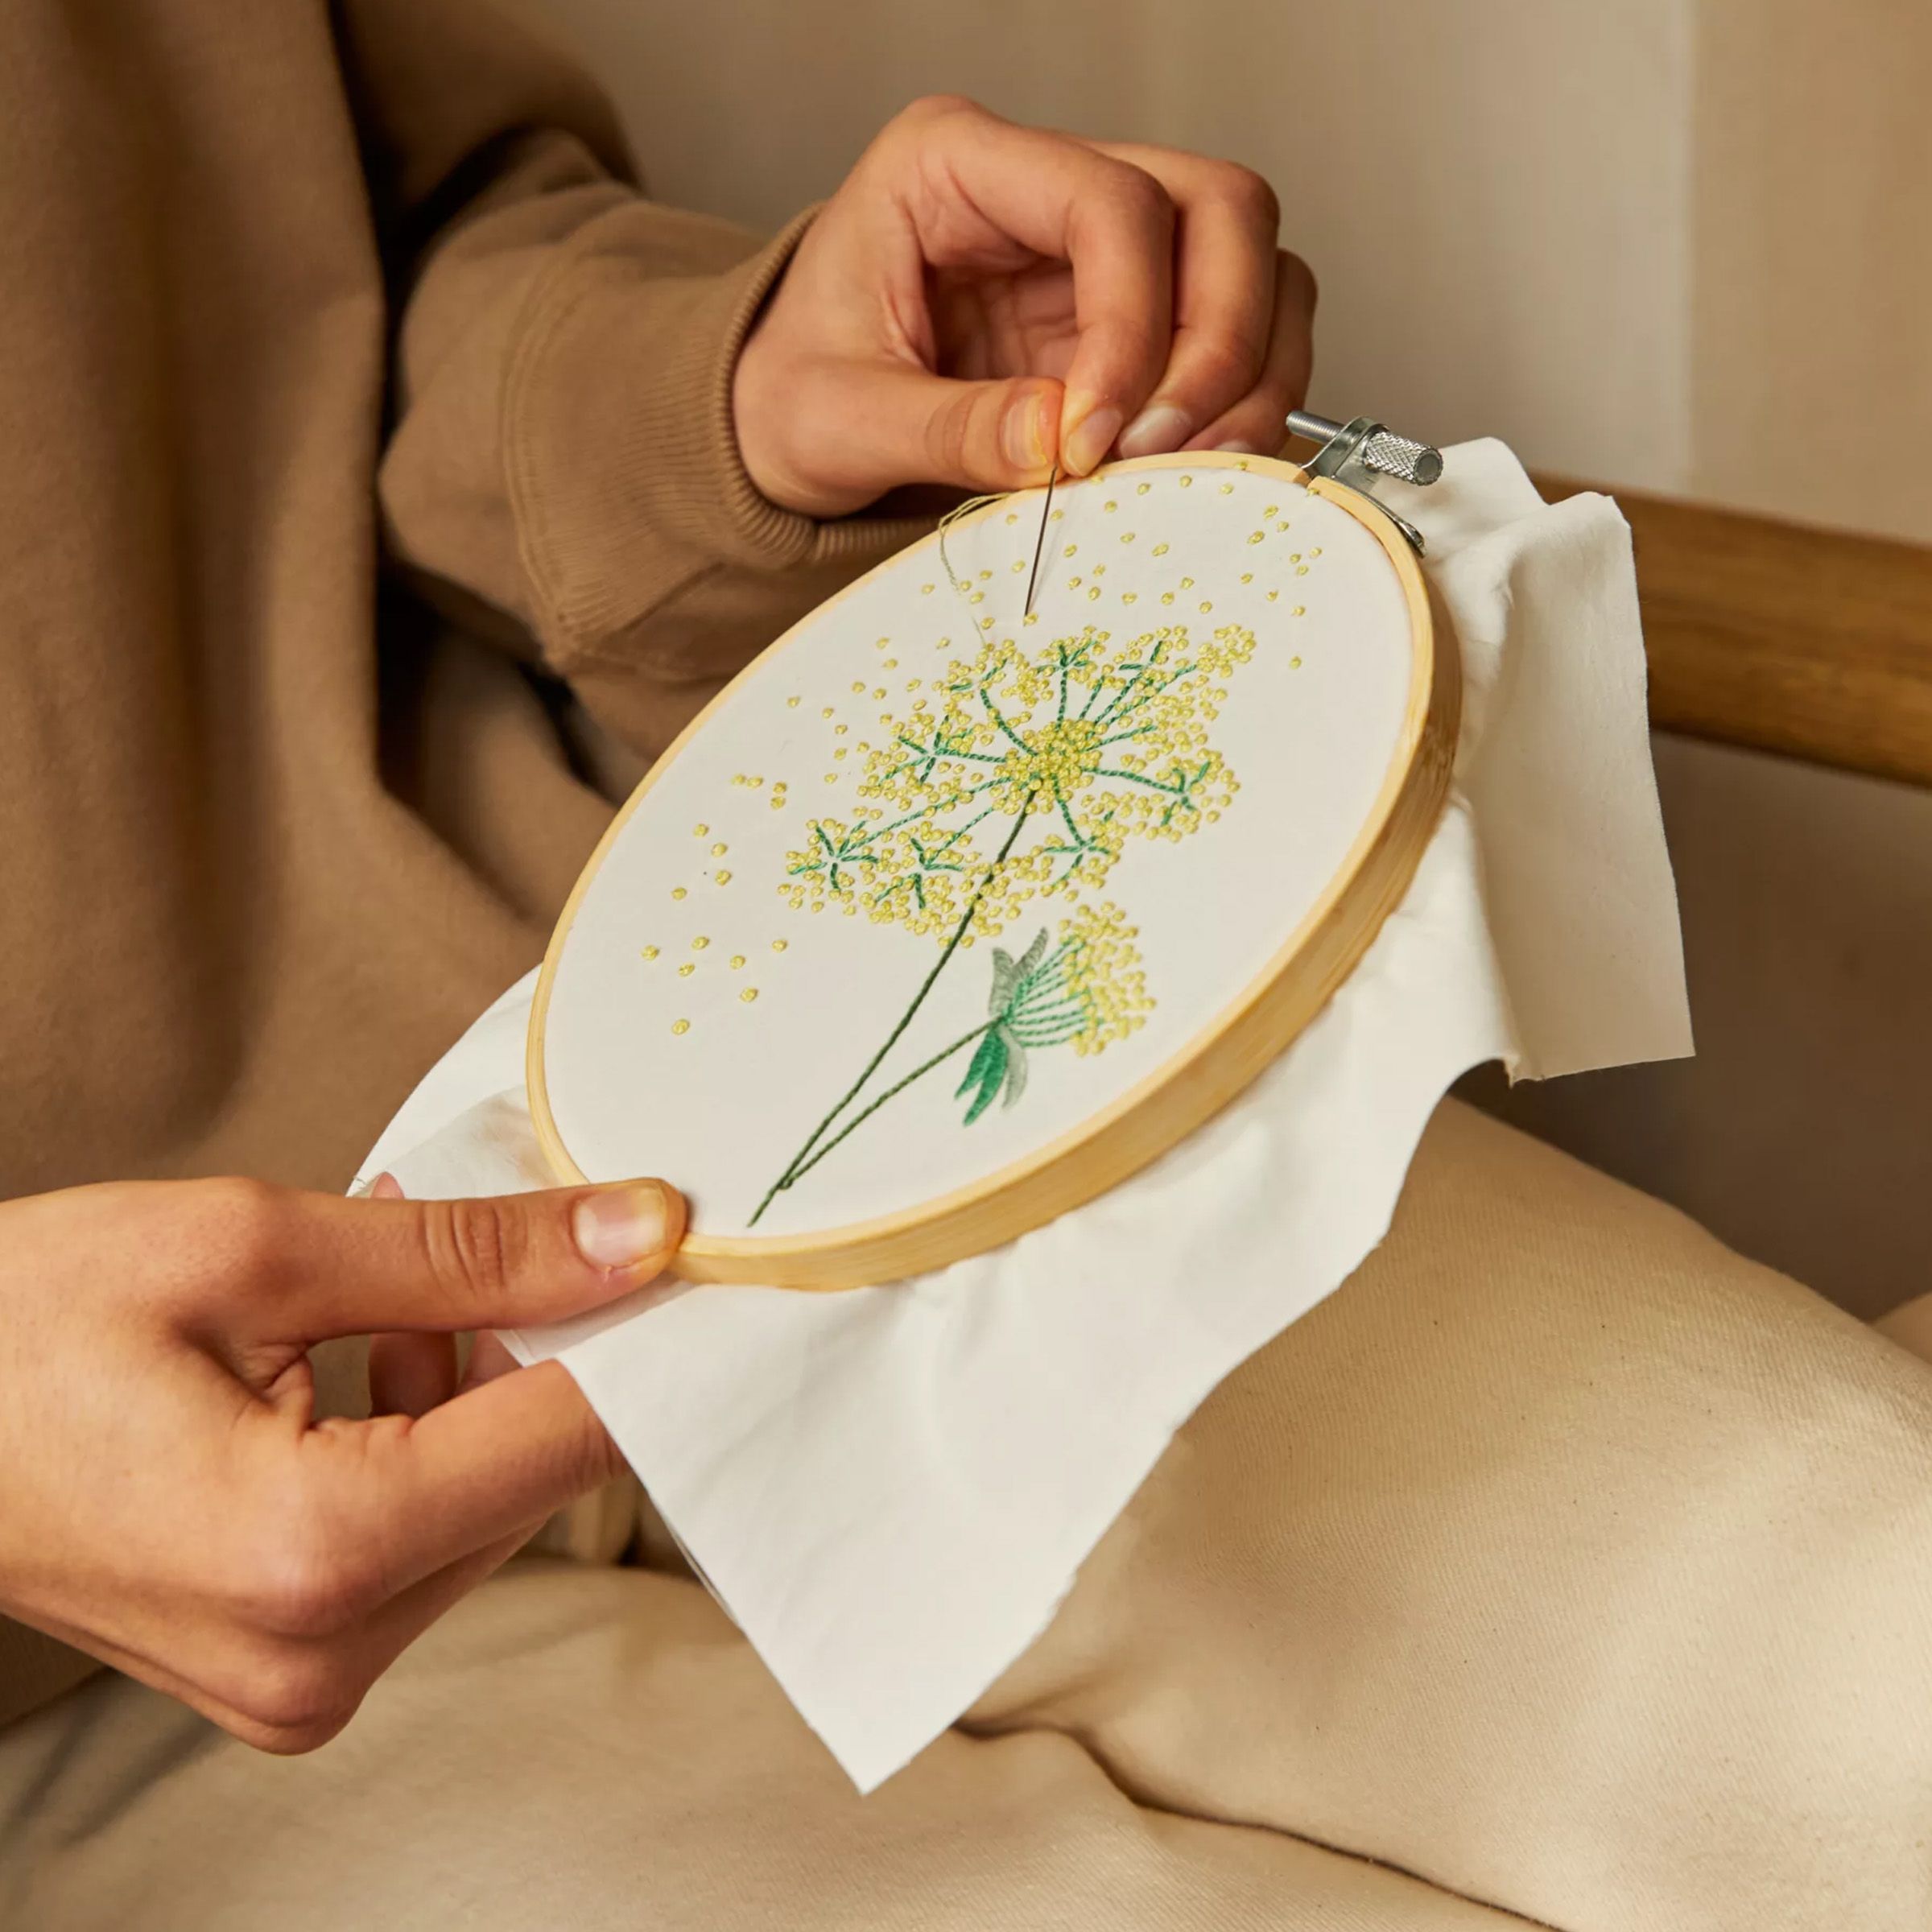 Person embroidering a flower onto a piece of fabric